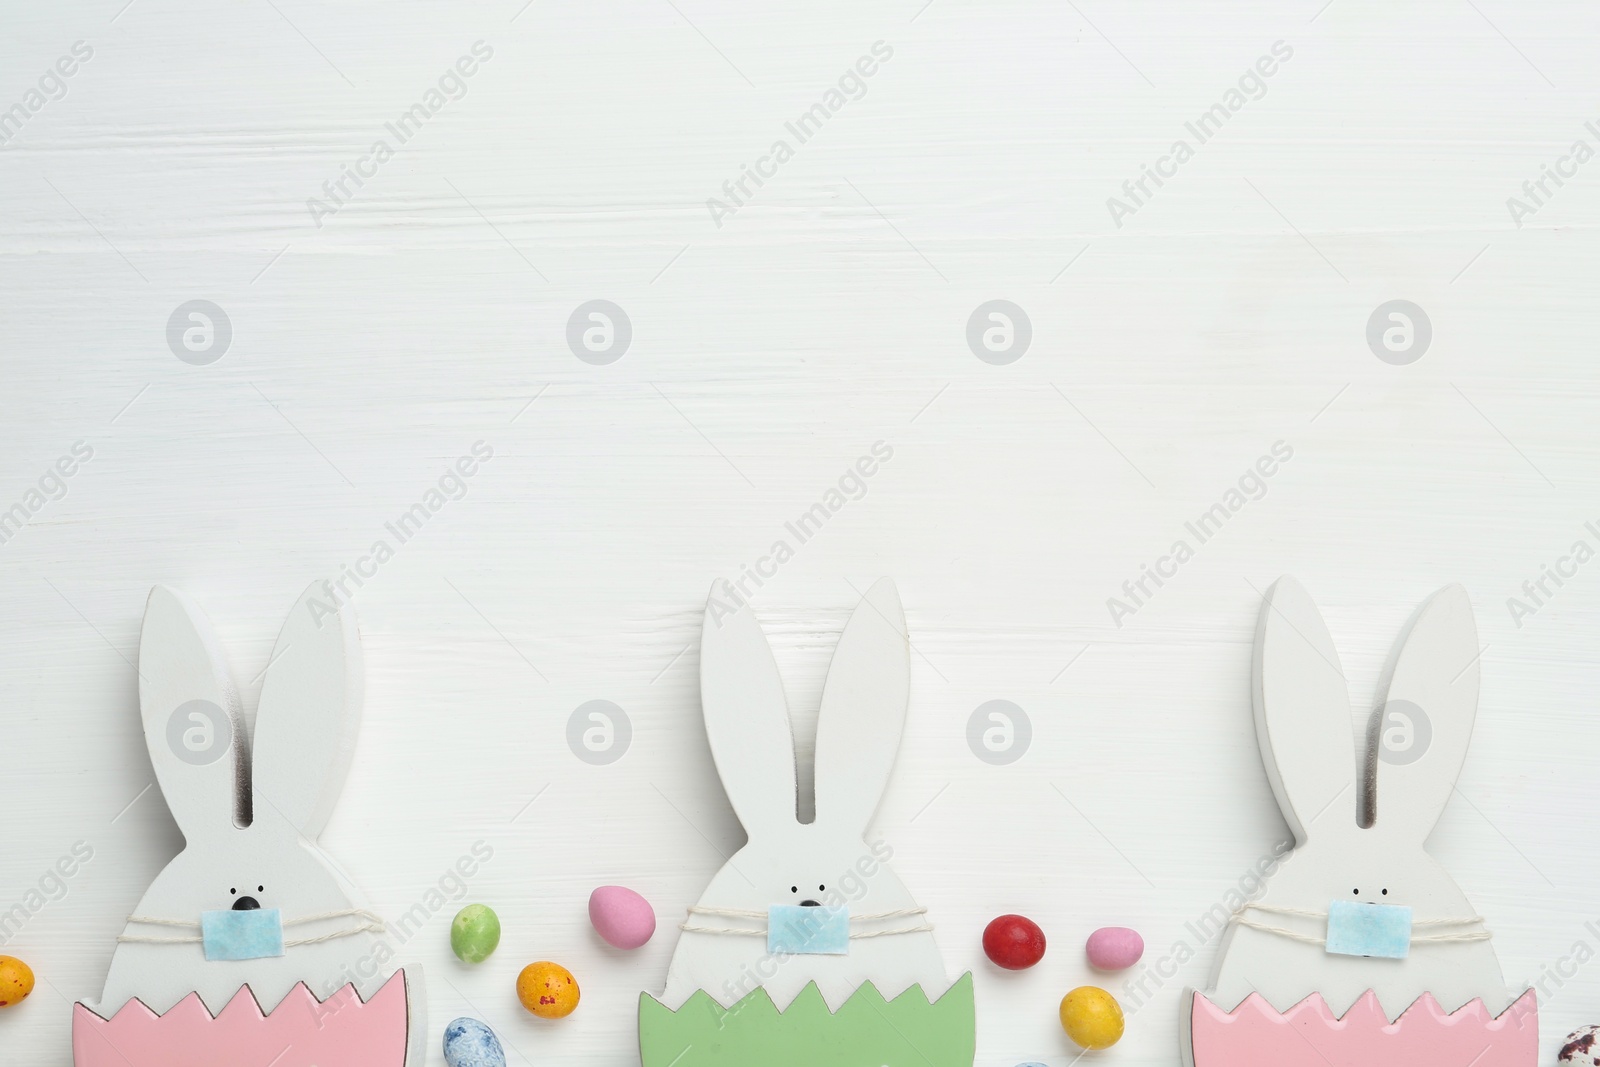 Photo of Candies and bunny figures in protective masks on white wooden table, flat lay with space for text. Easter holiday during COVID-19 quarantine